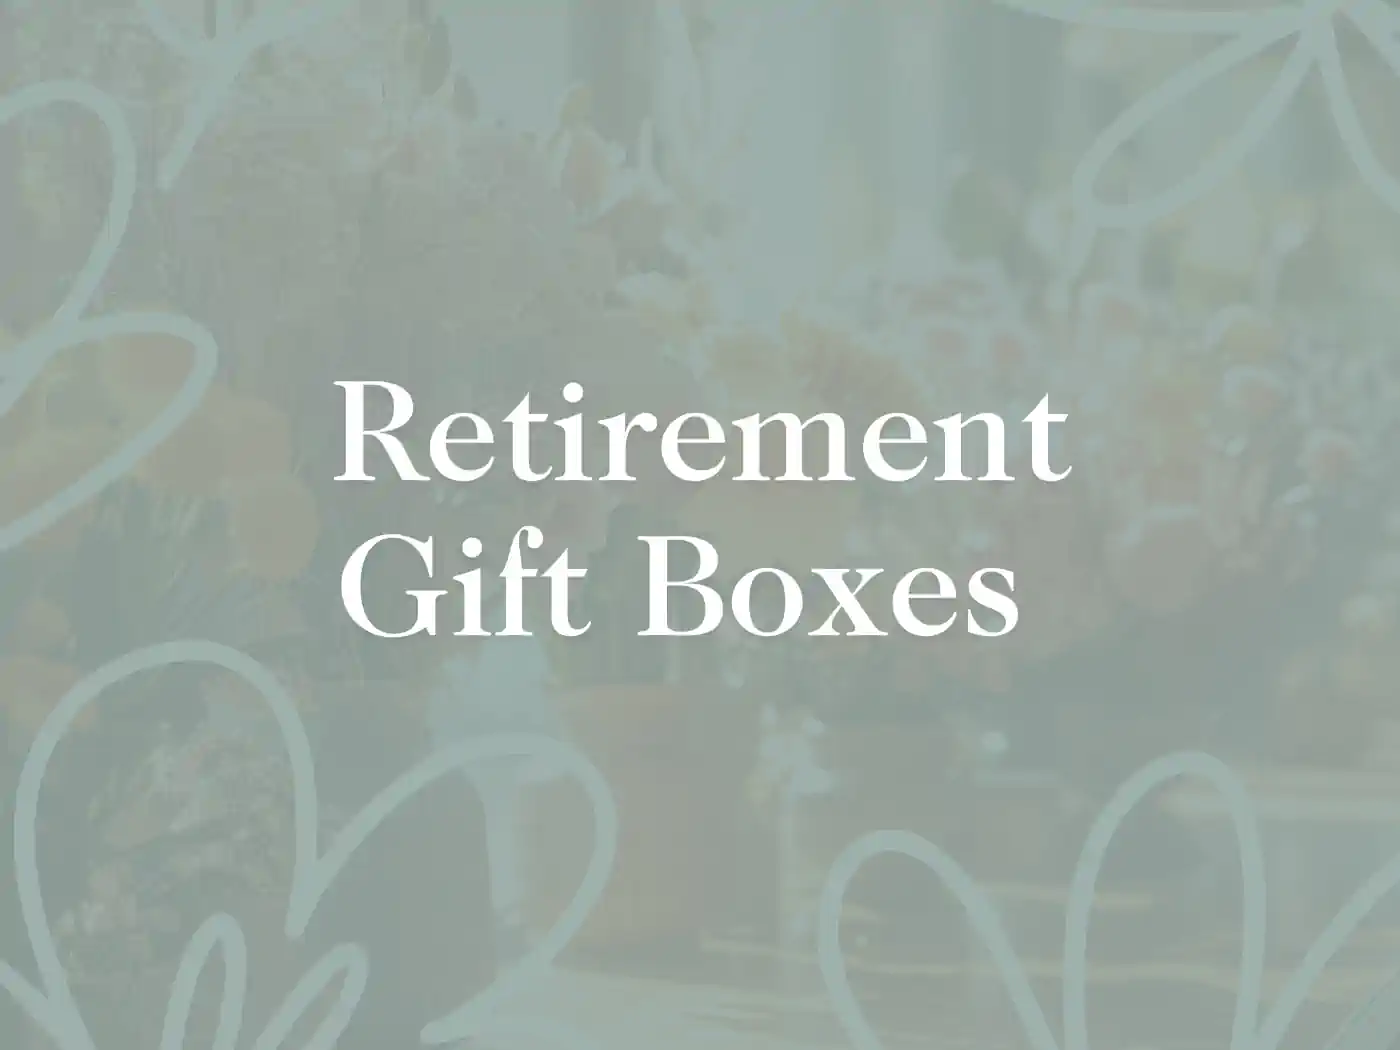 Image showing the title "Retirement Gift Boxes" in an elegant font. Fabulous Flowers and Gifts. Retirement Gift Boxes.